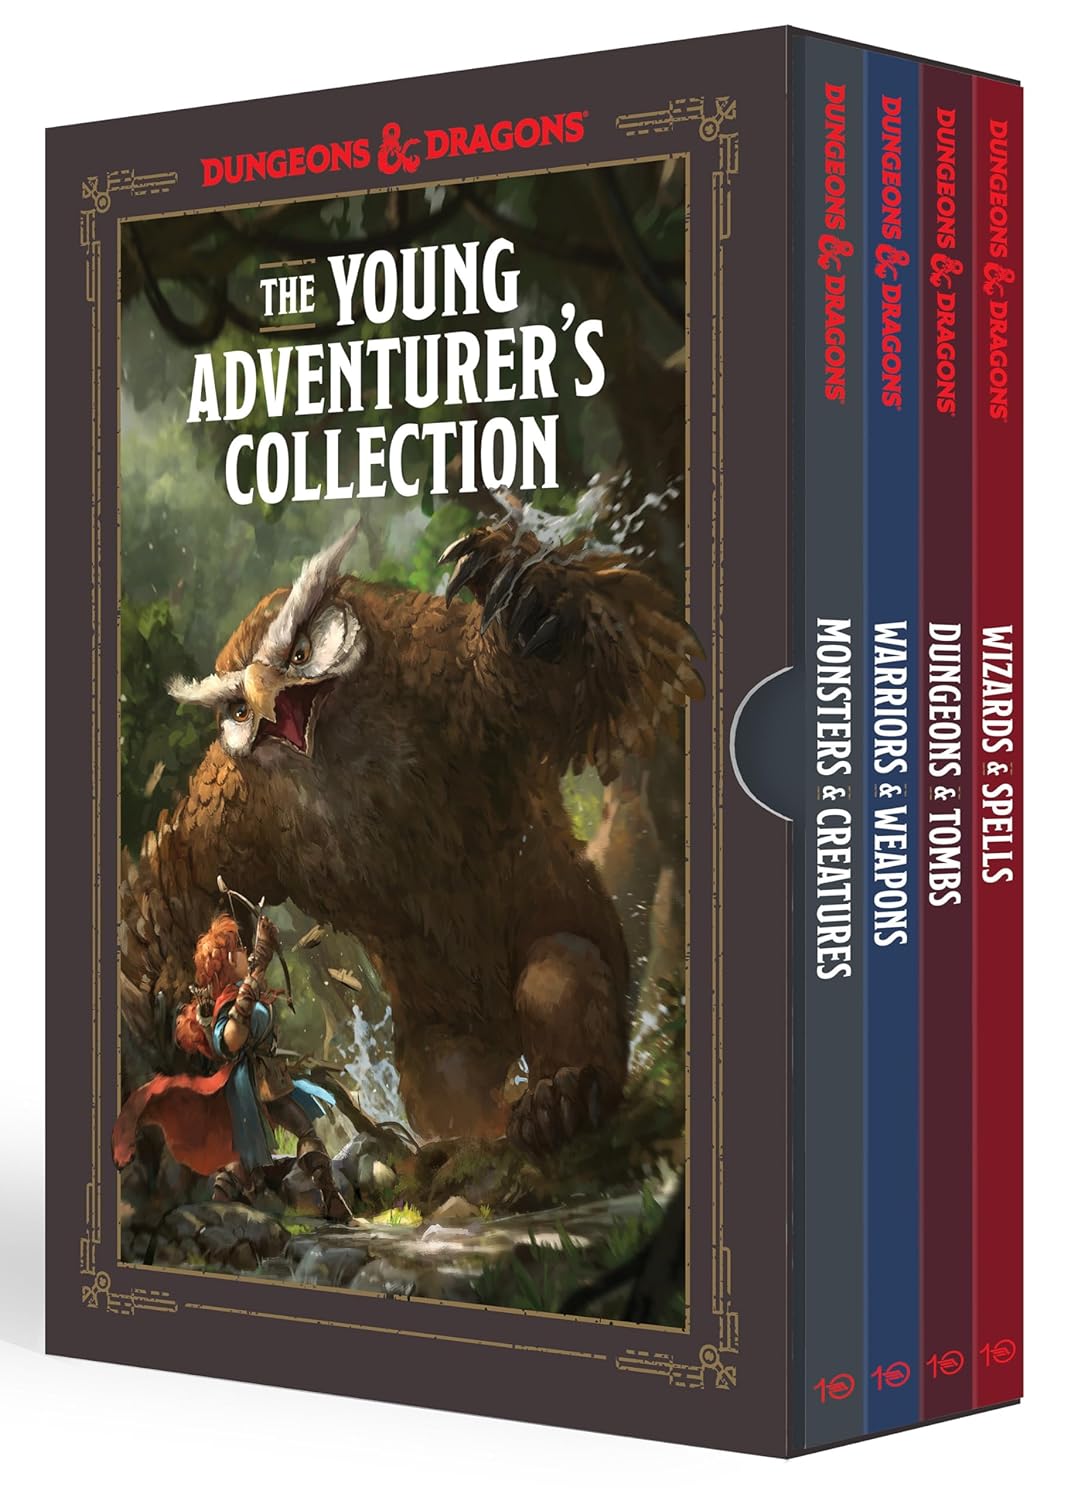 The Young Adventurer's Collection (D&D)